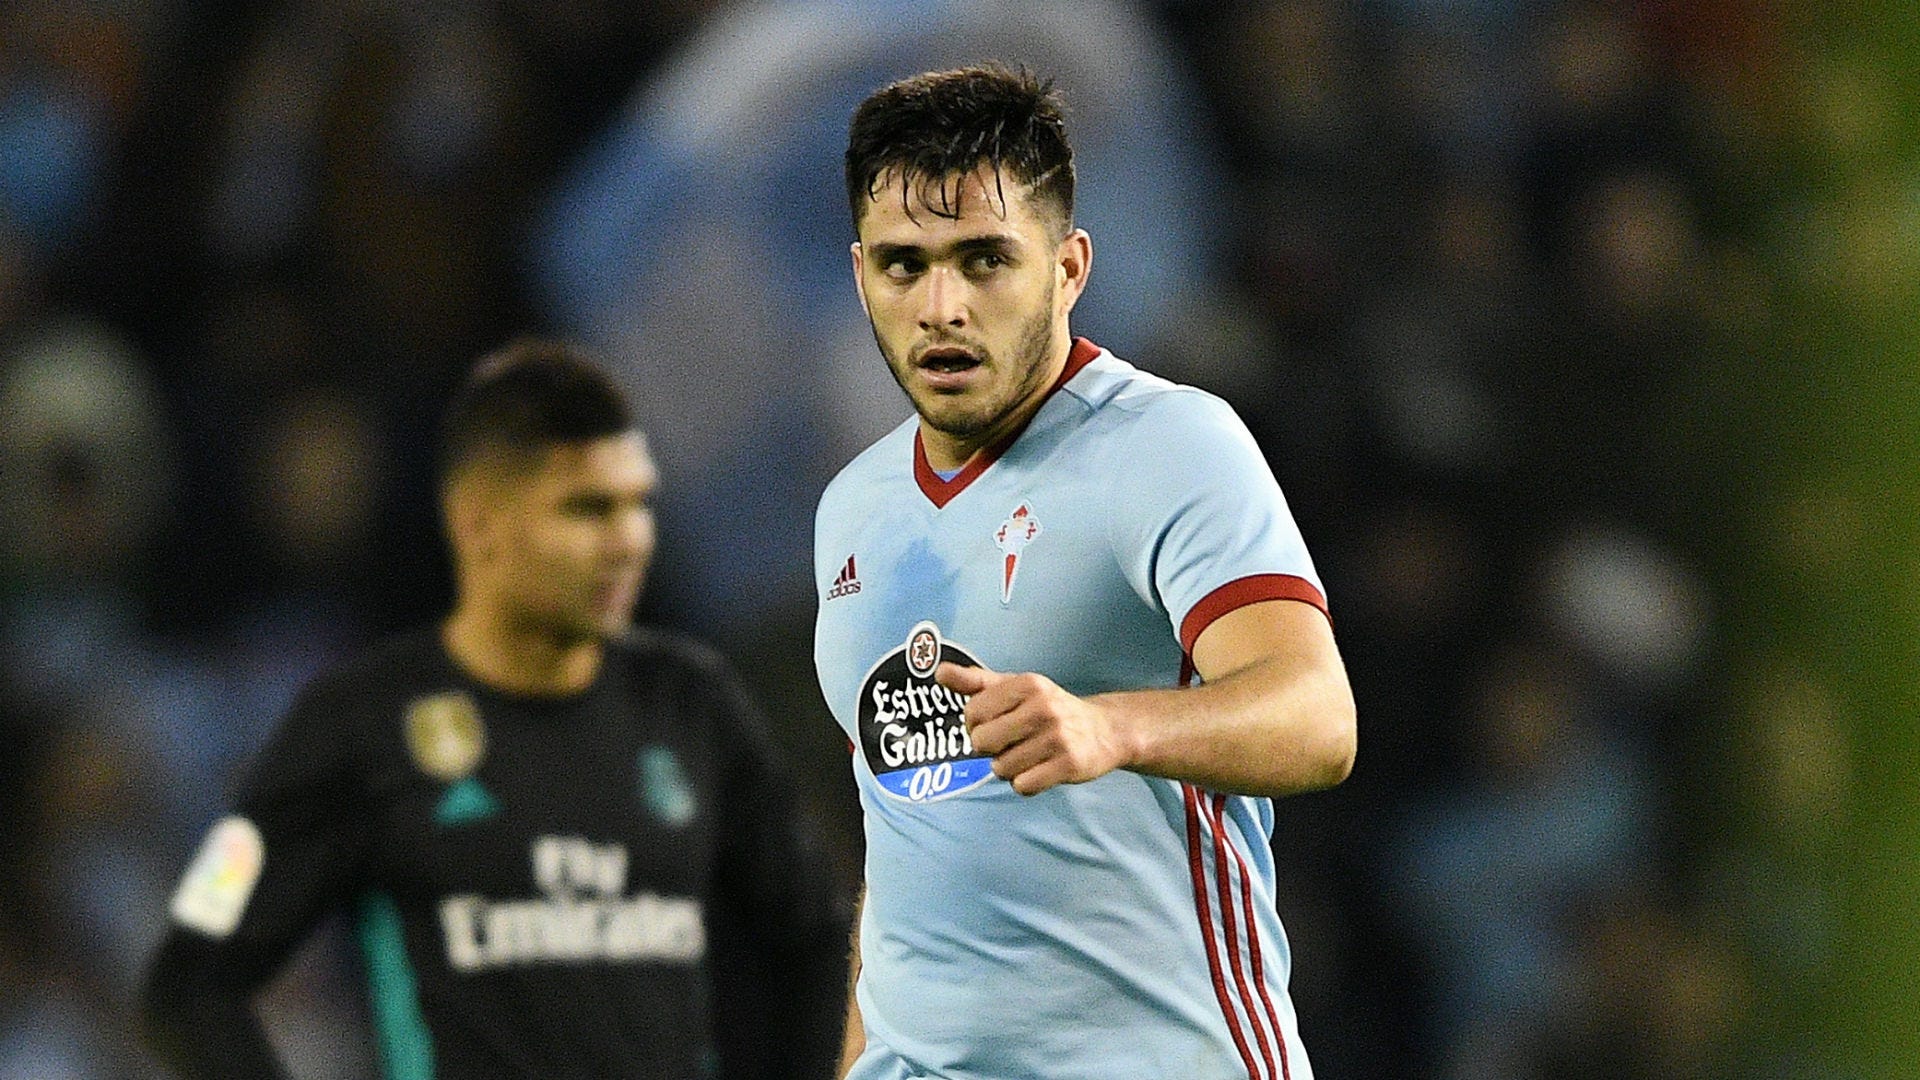 Transfer news and rumours LIVE Liverpool after £35m Maxi Gomez Goal